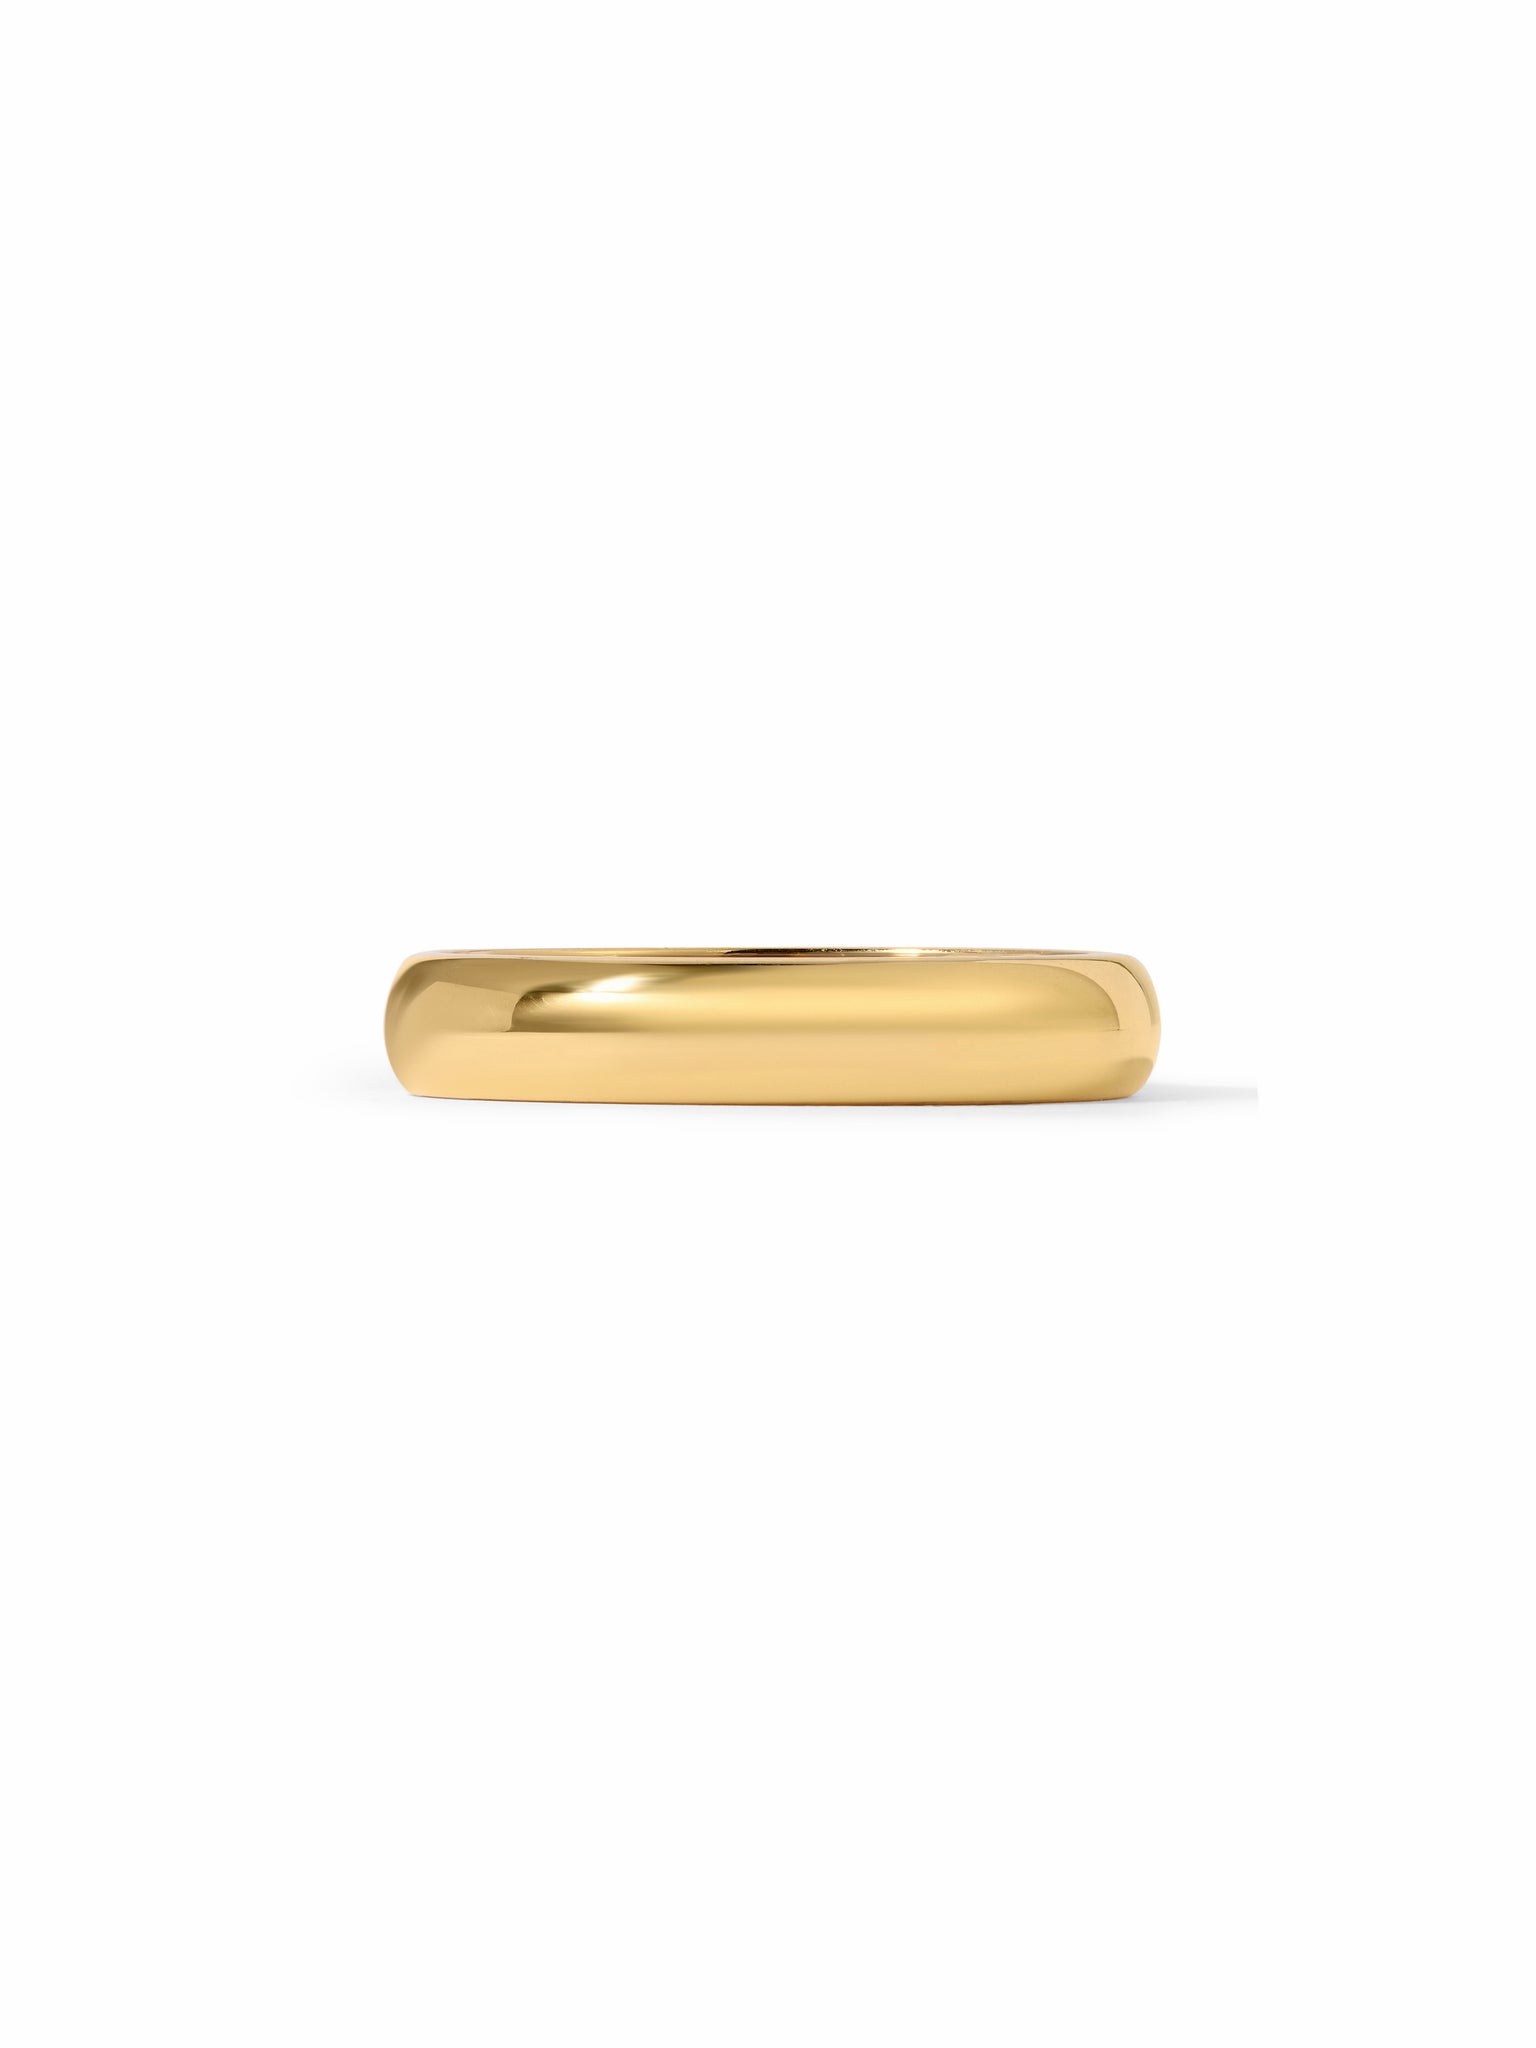 The Gold Band Ring